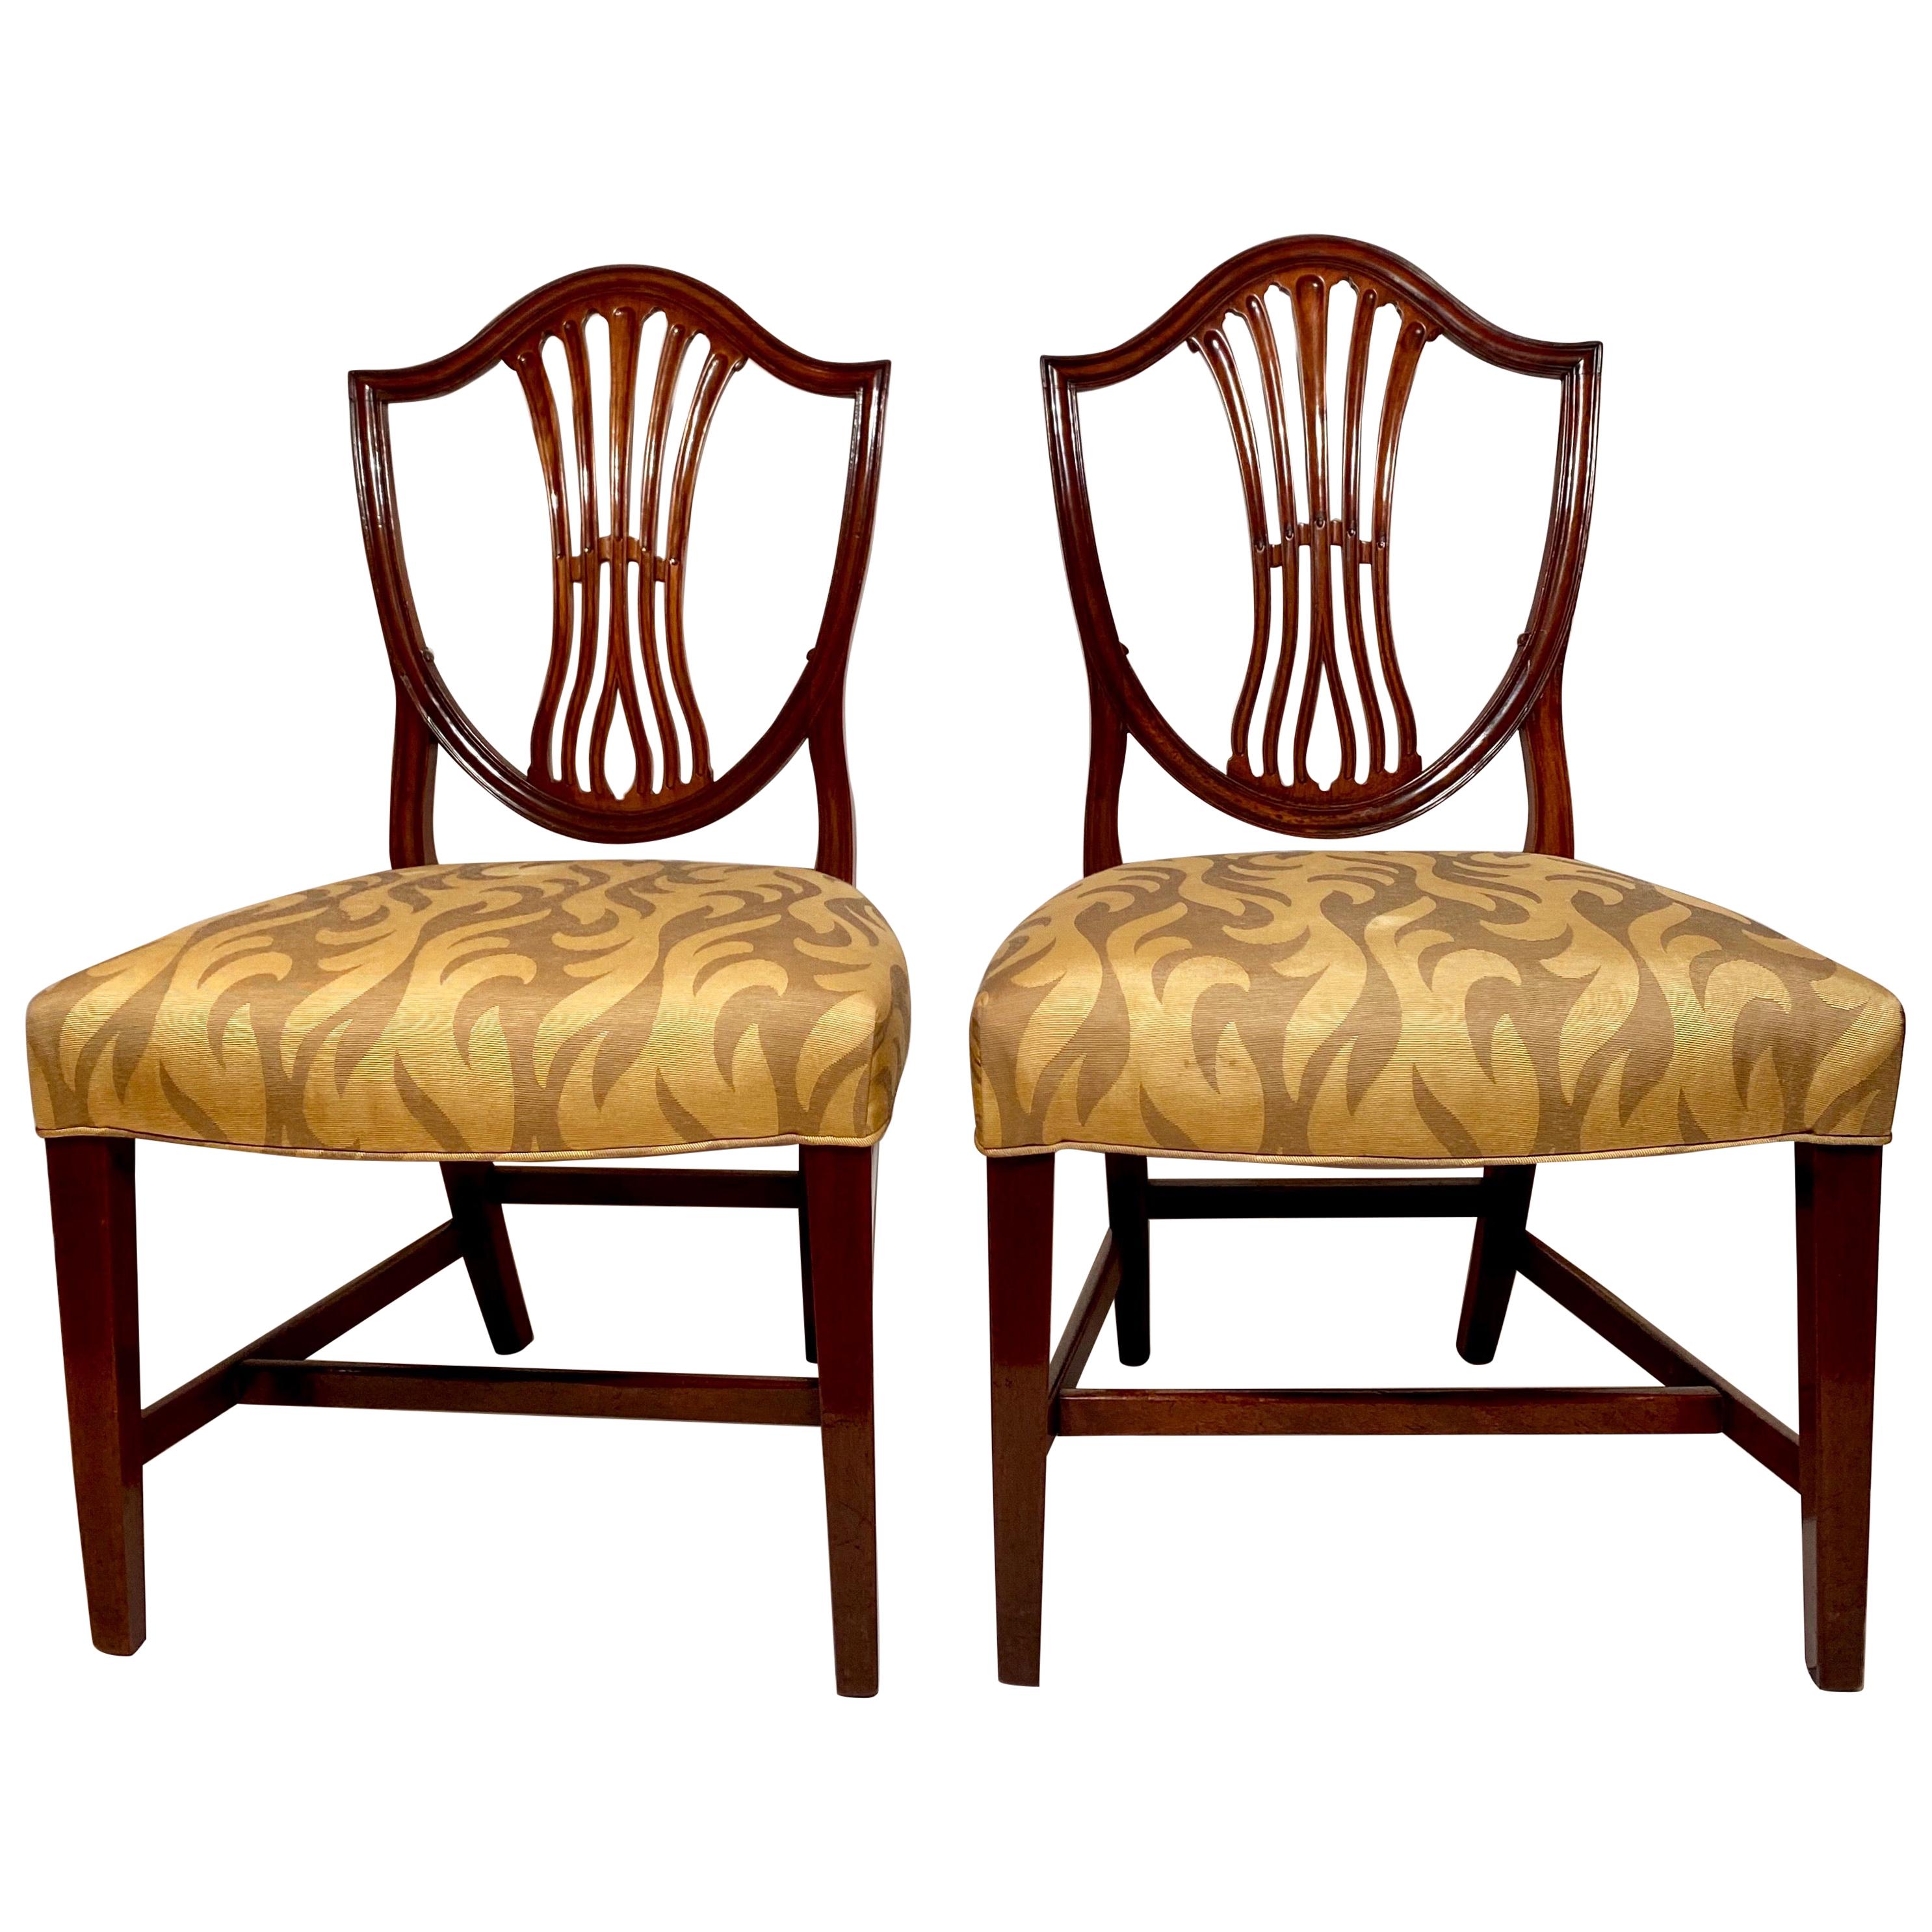 Antique French Fine Walnut Side Chairs, circa 1880